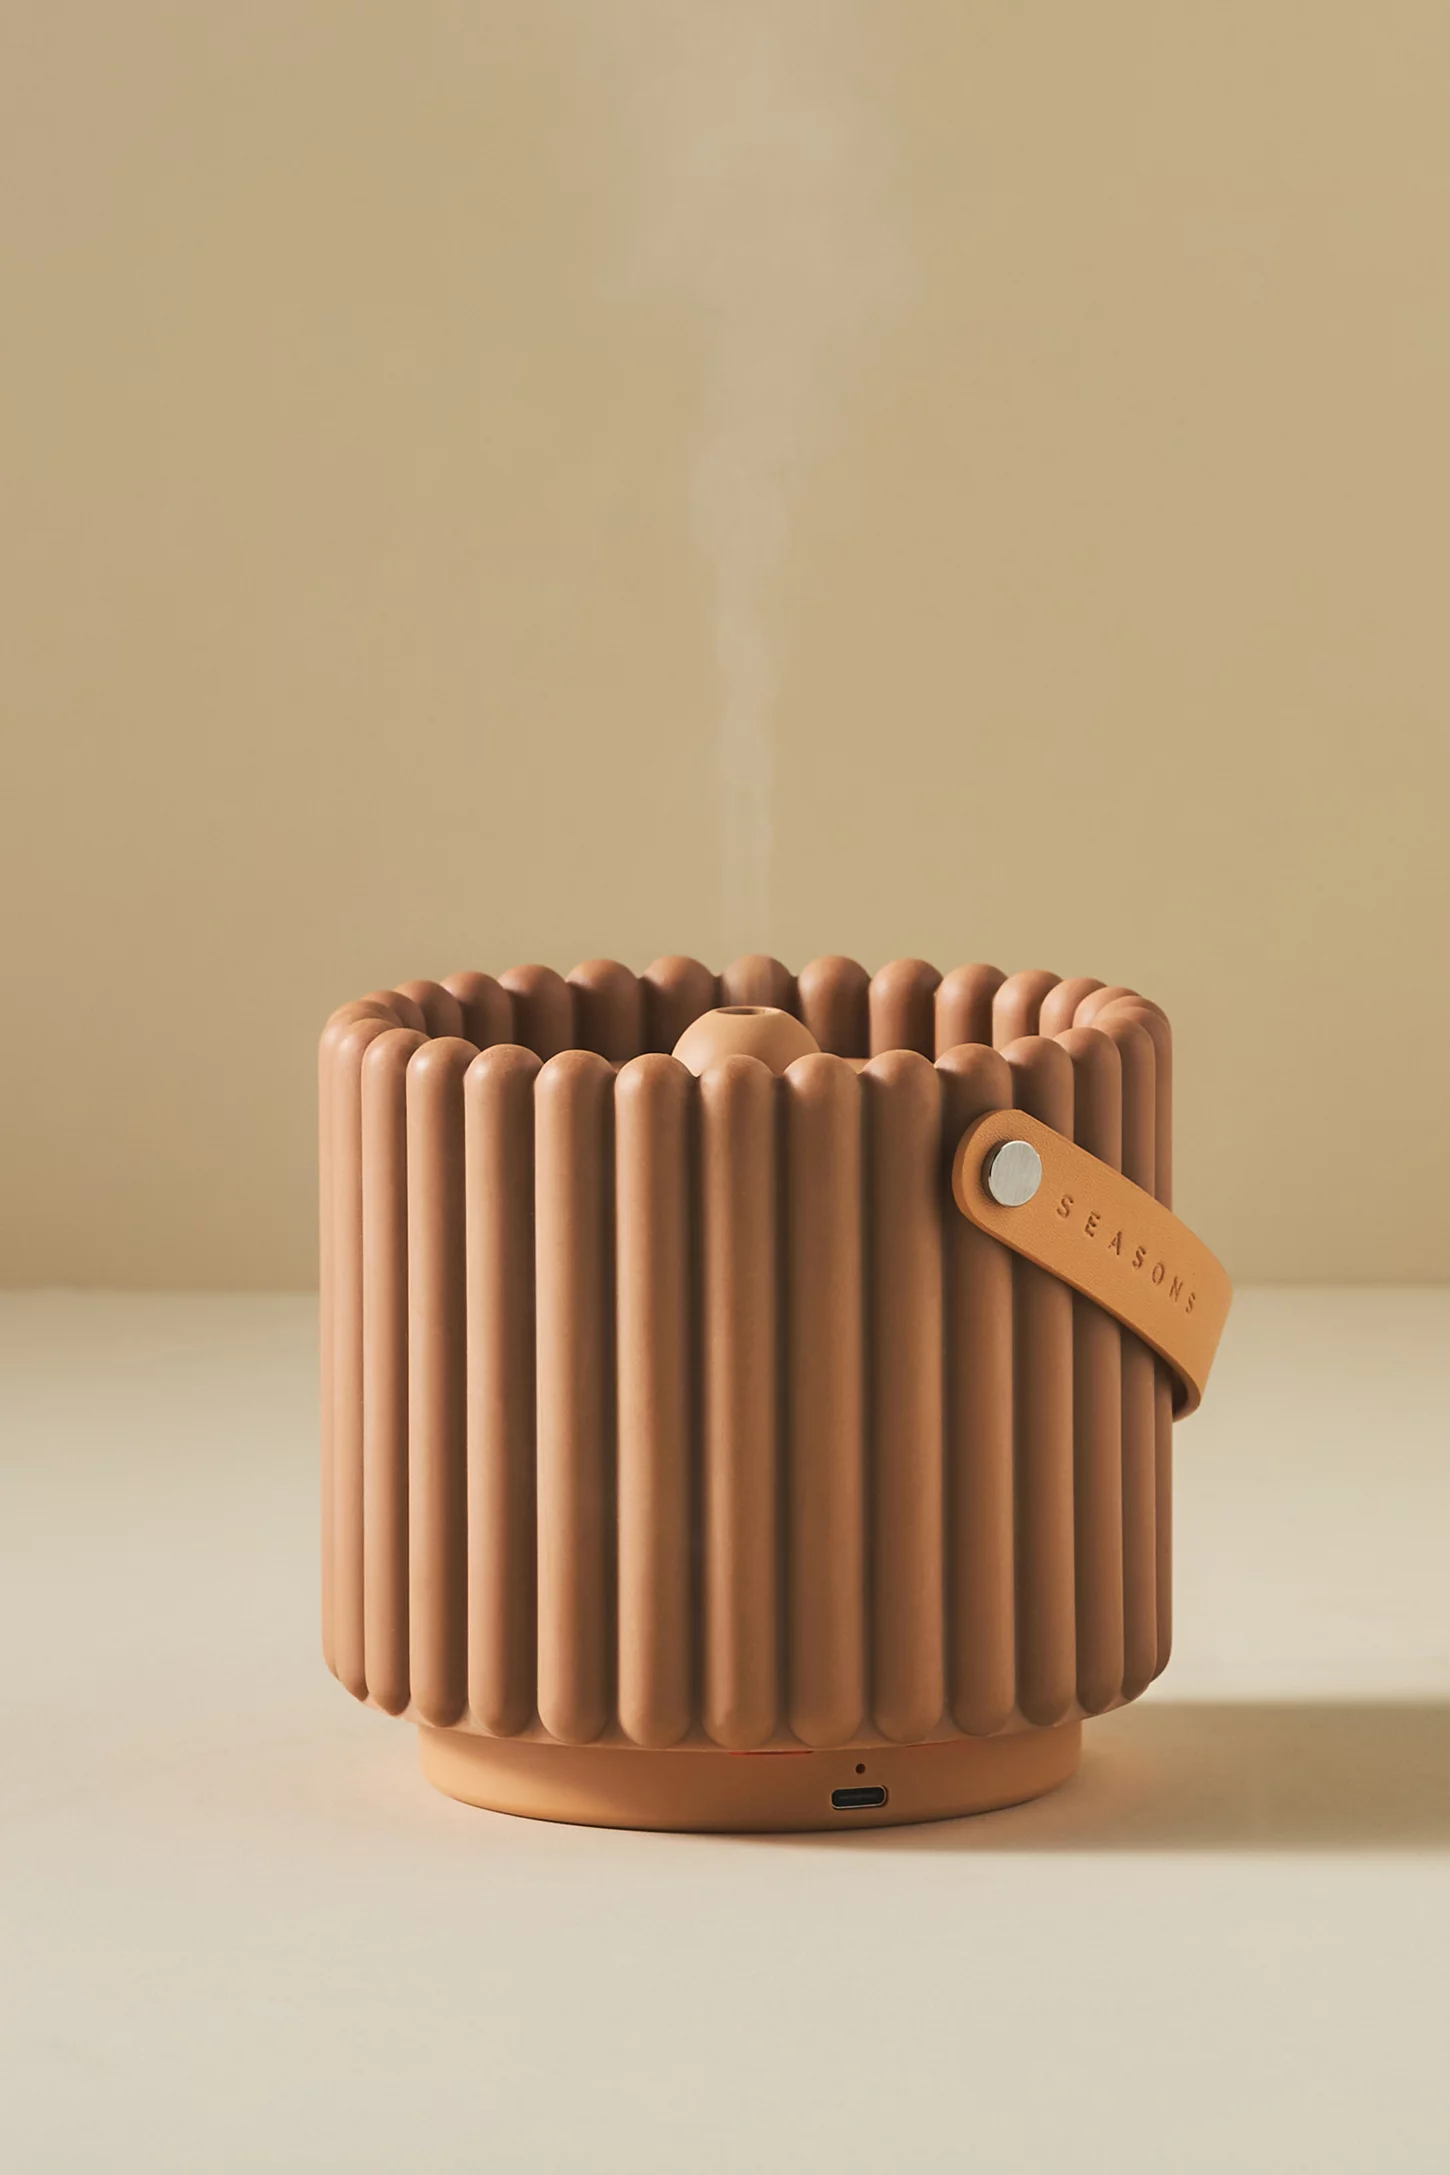 A ribbed, cylindrical humidifier emitting steam, with a leather strap labeled "Seasons" and a USB-C port at the base, placed on a beige surface.